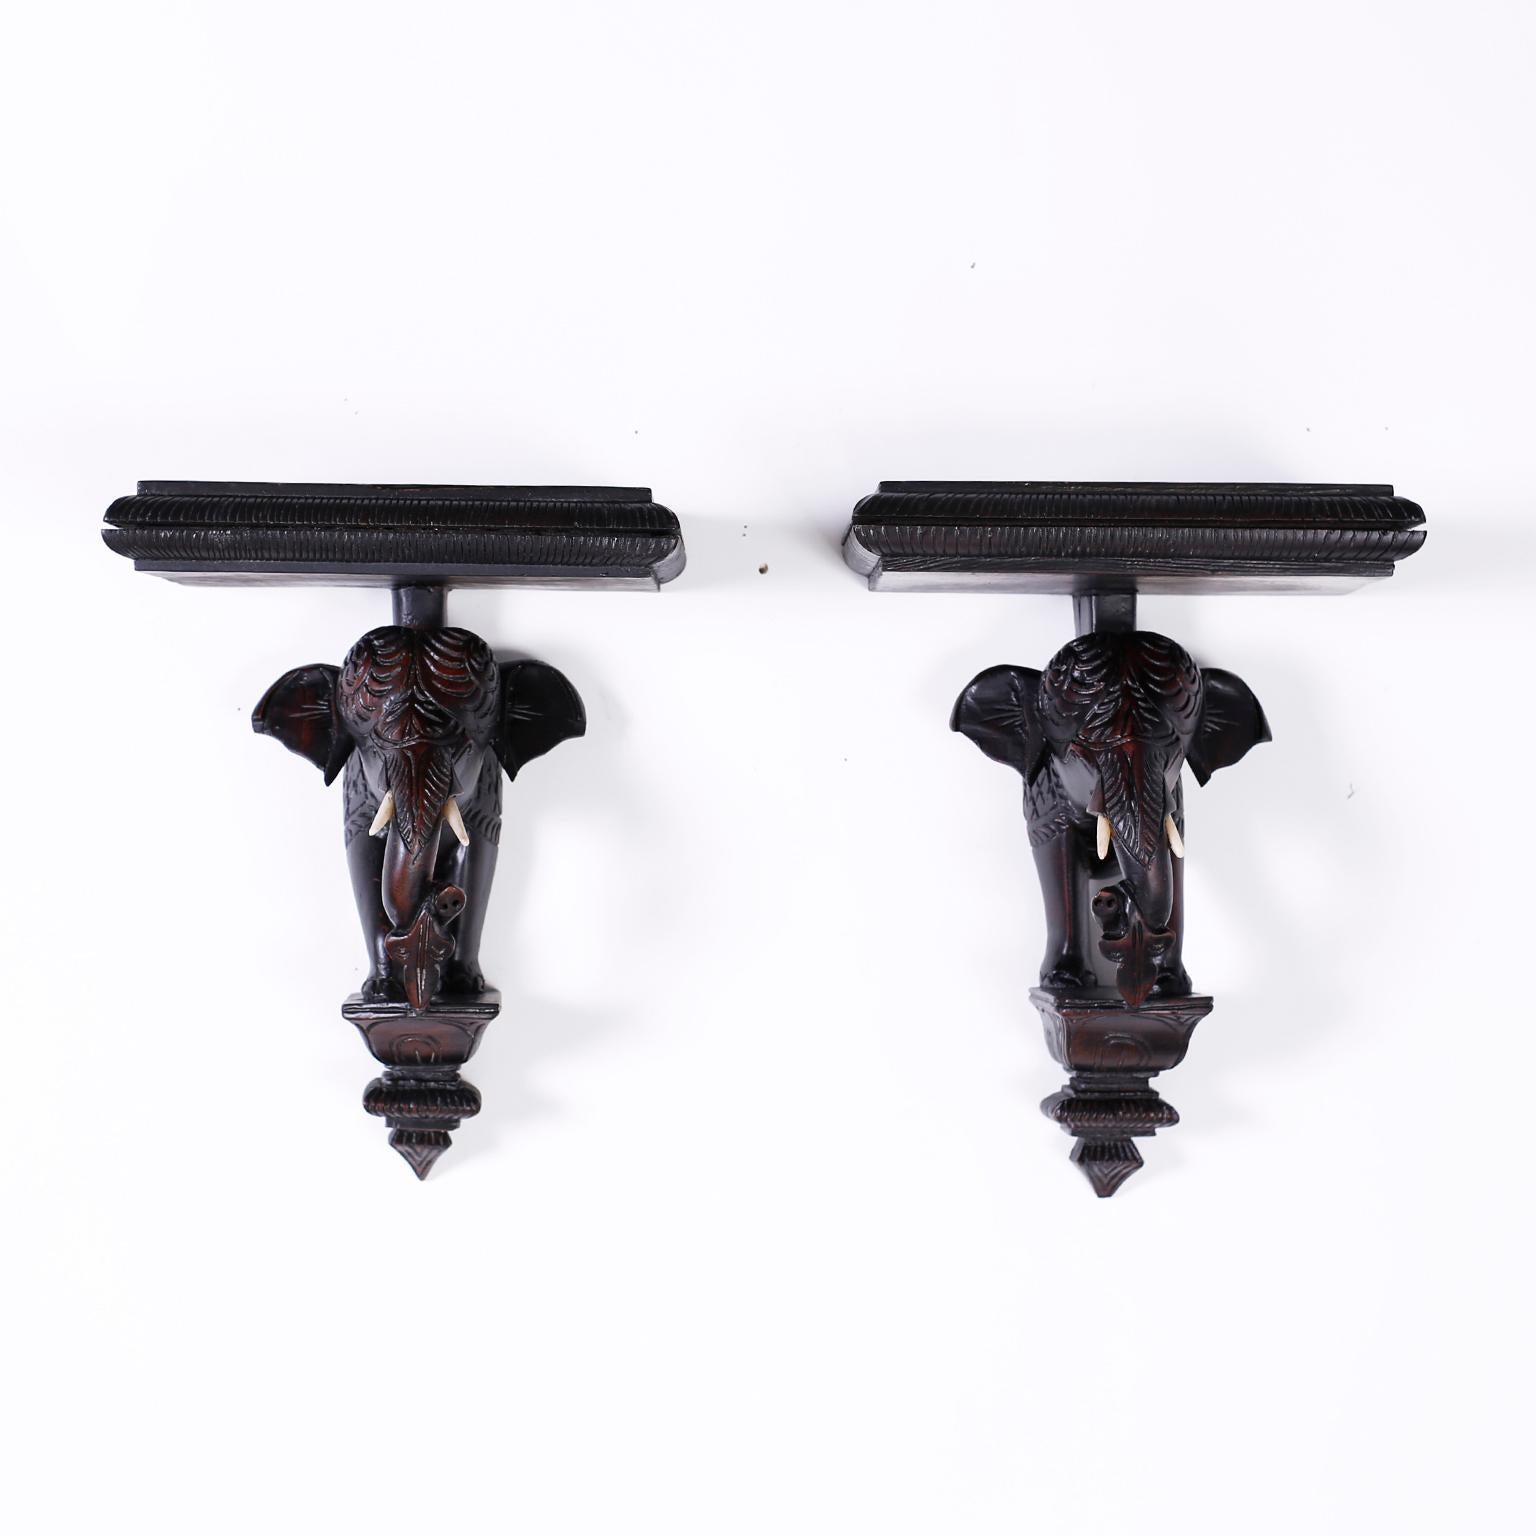 British colonial style Anglo Indian wall brackets crafted in mahogany, depicting elephant busts on pedestals supporting a shelf with an ebonized finish.